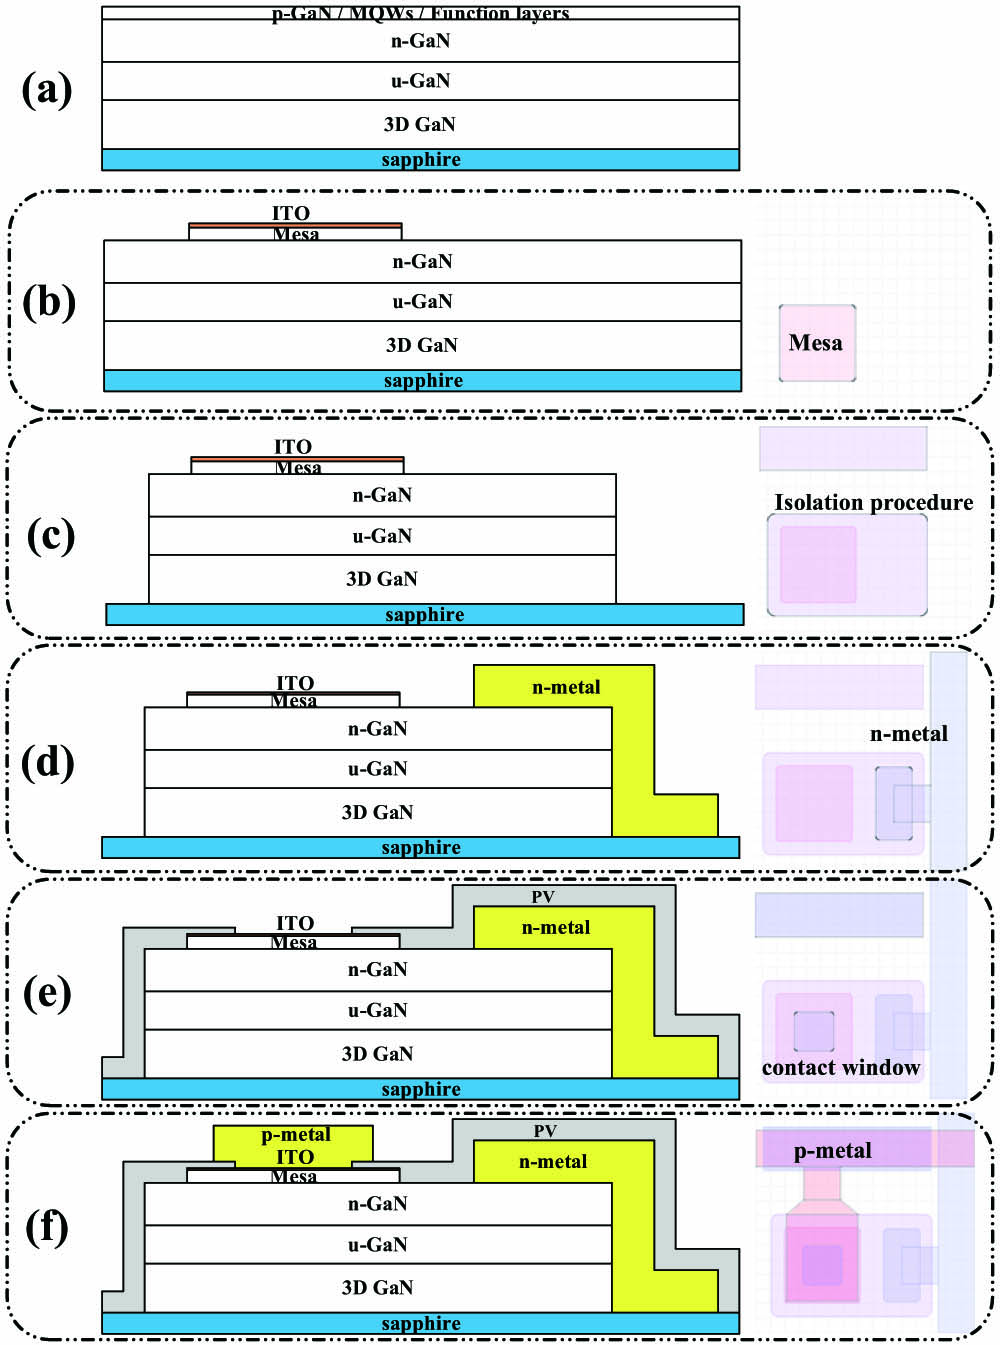 Process flow of the 5-step lithography for the micro-LED displays. The left side is the side view and the right side is the top view. The figure is not drawn to scale. (a) The initial state of the epi-wafer, (b) the current spreading region and mesa fabrication, (c) the pixel isolation, (d) the n-contact metal deposition, (e) the p-contact window formation, and (f) the p-contact metal deposition.